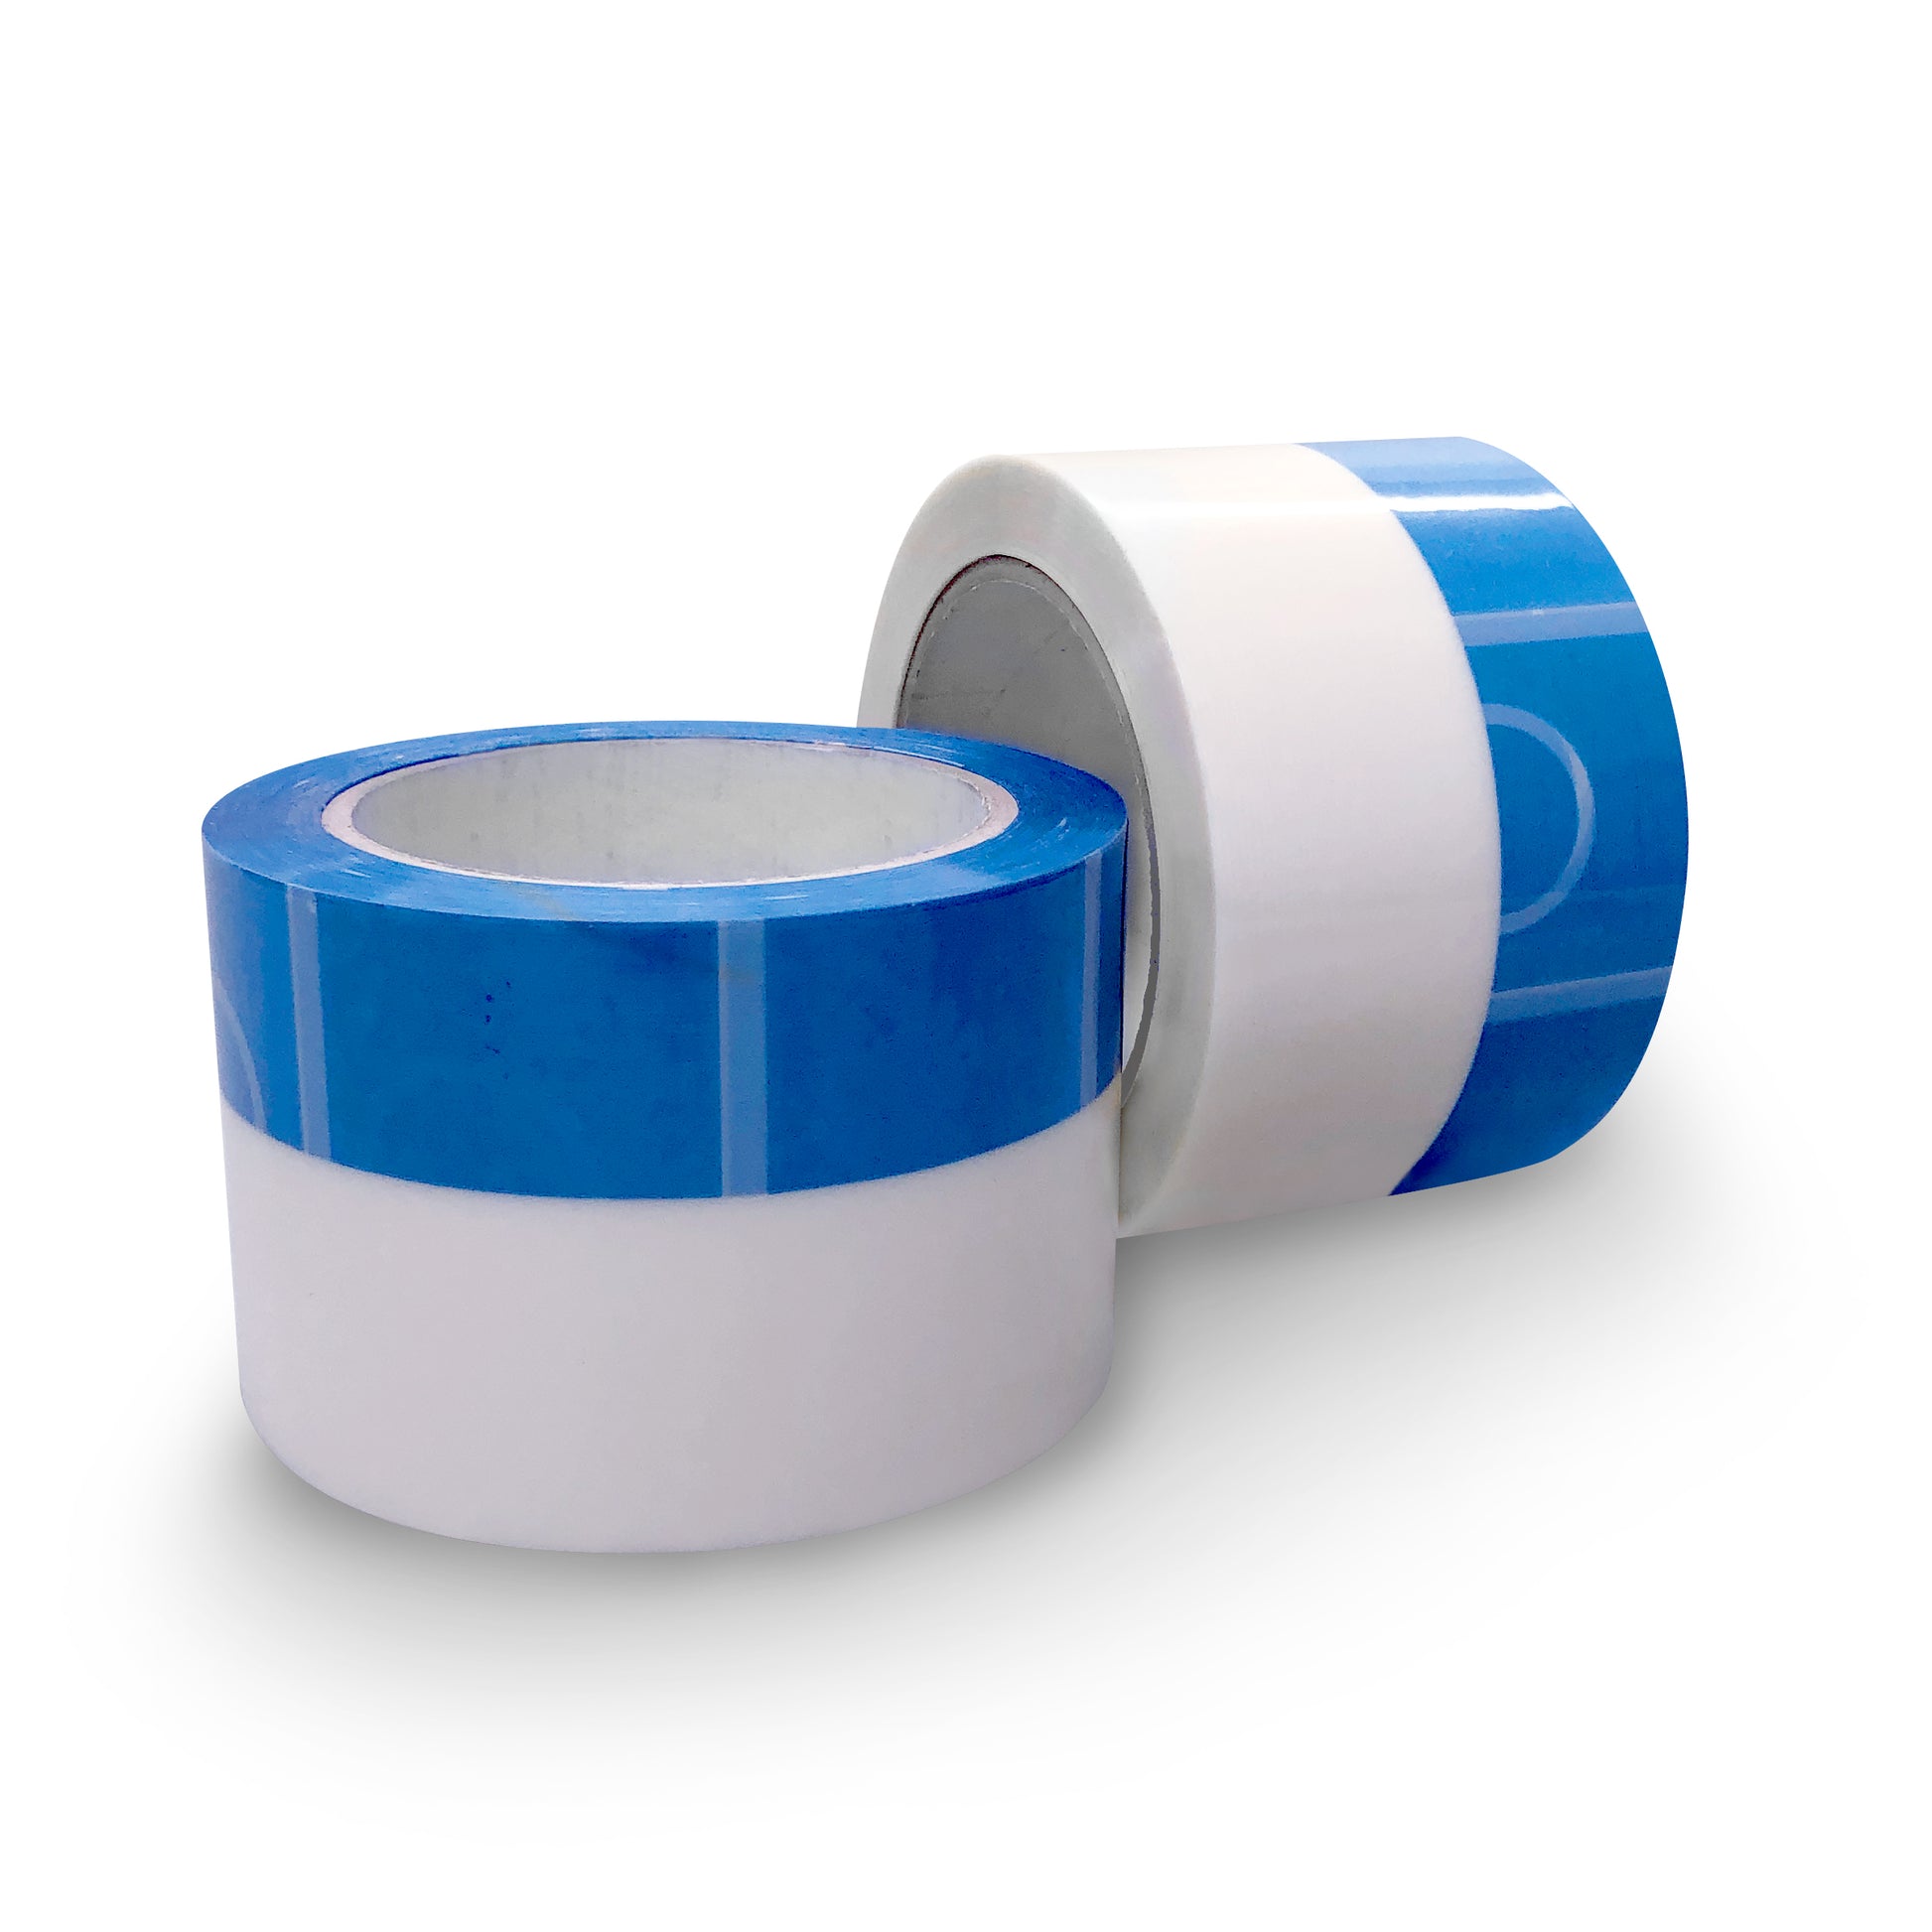 Buy Insulation Tape at Materials Market